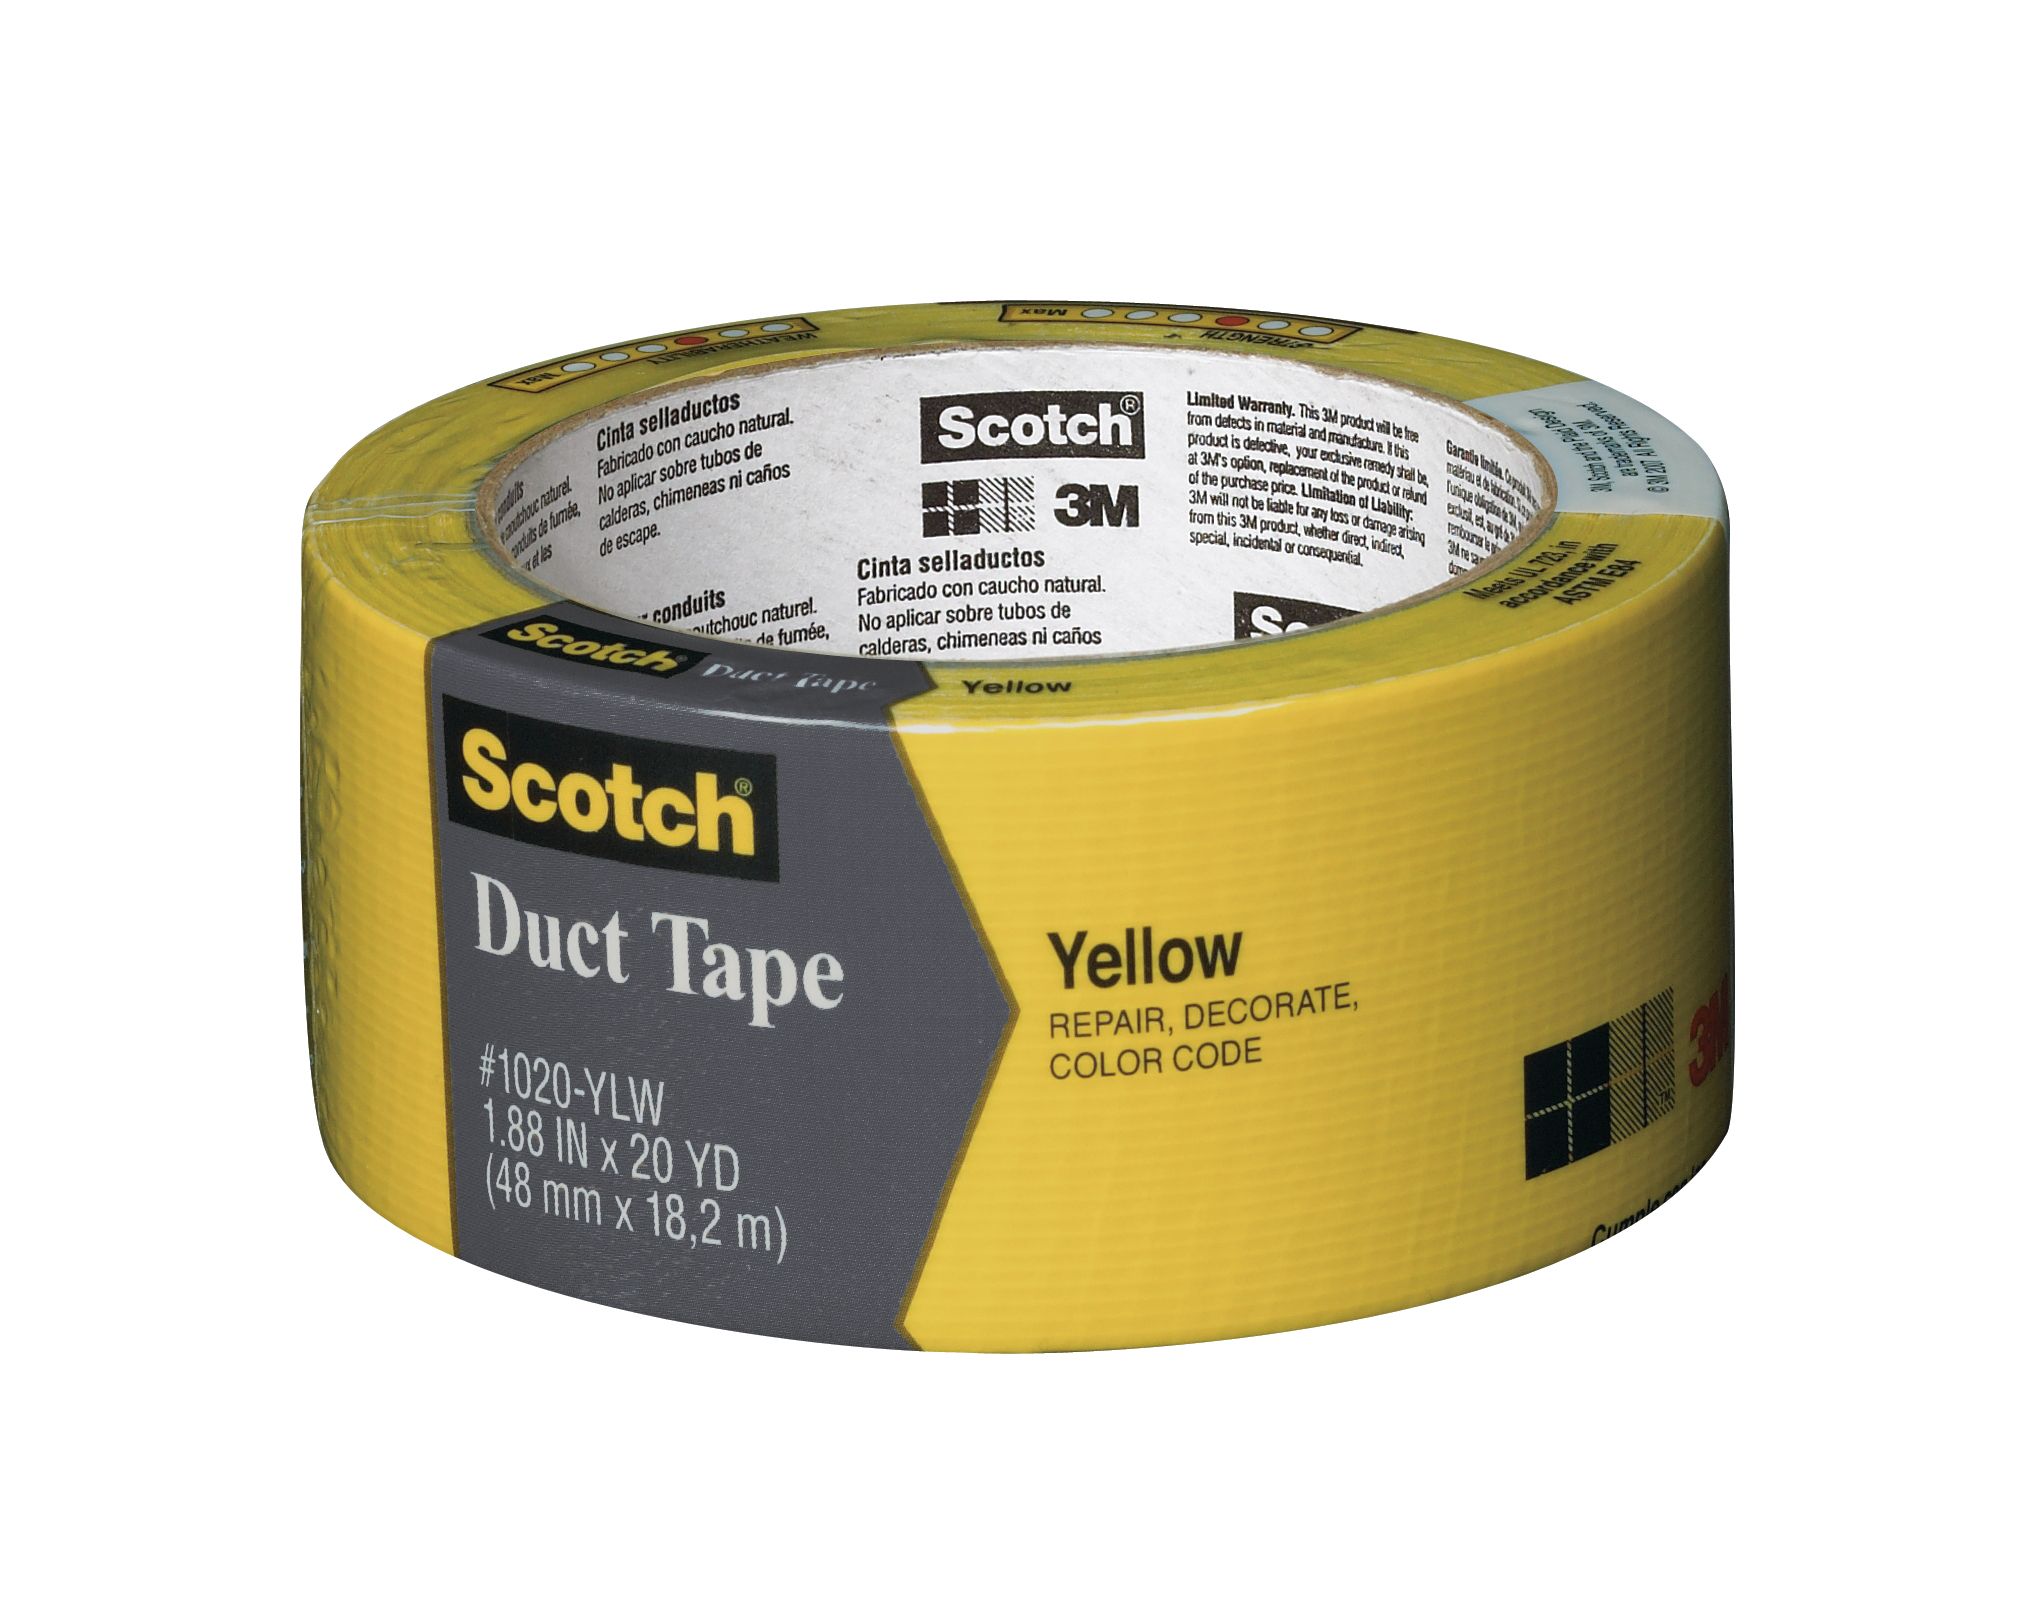 Scotch Duct Tape Yellow 1.88 in x 20 yd